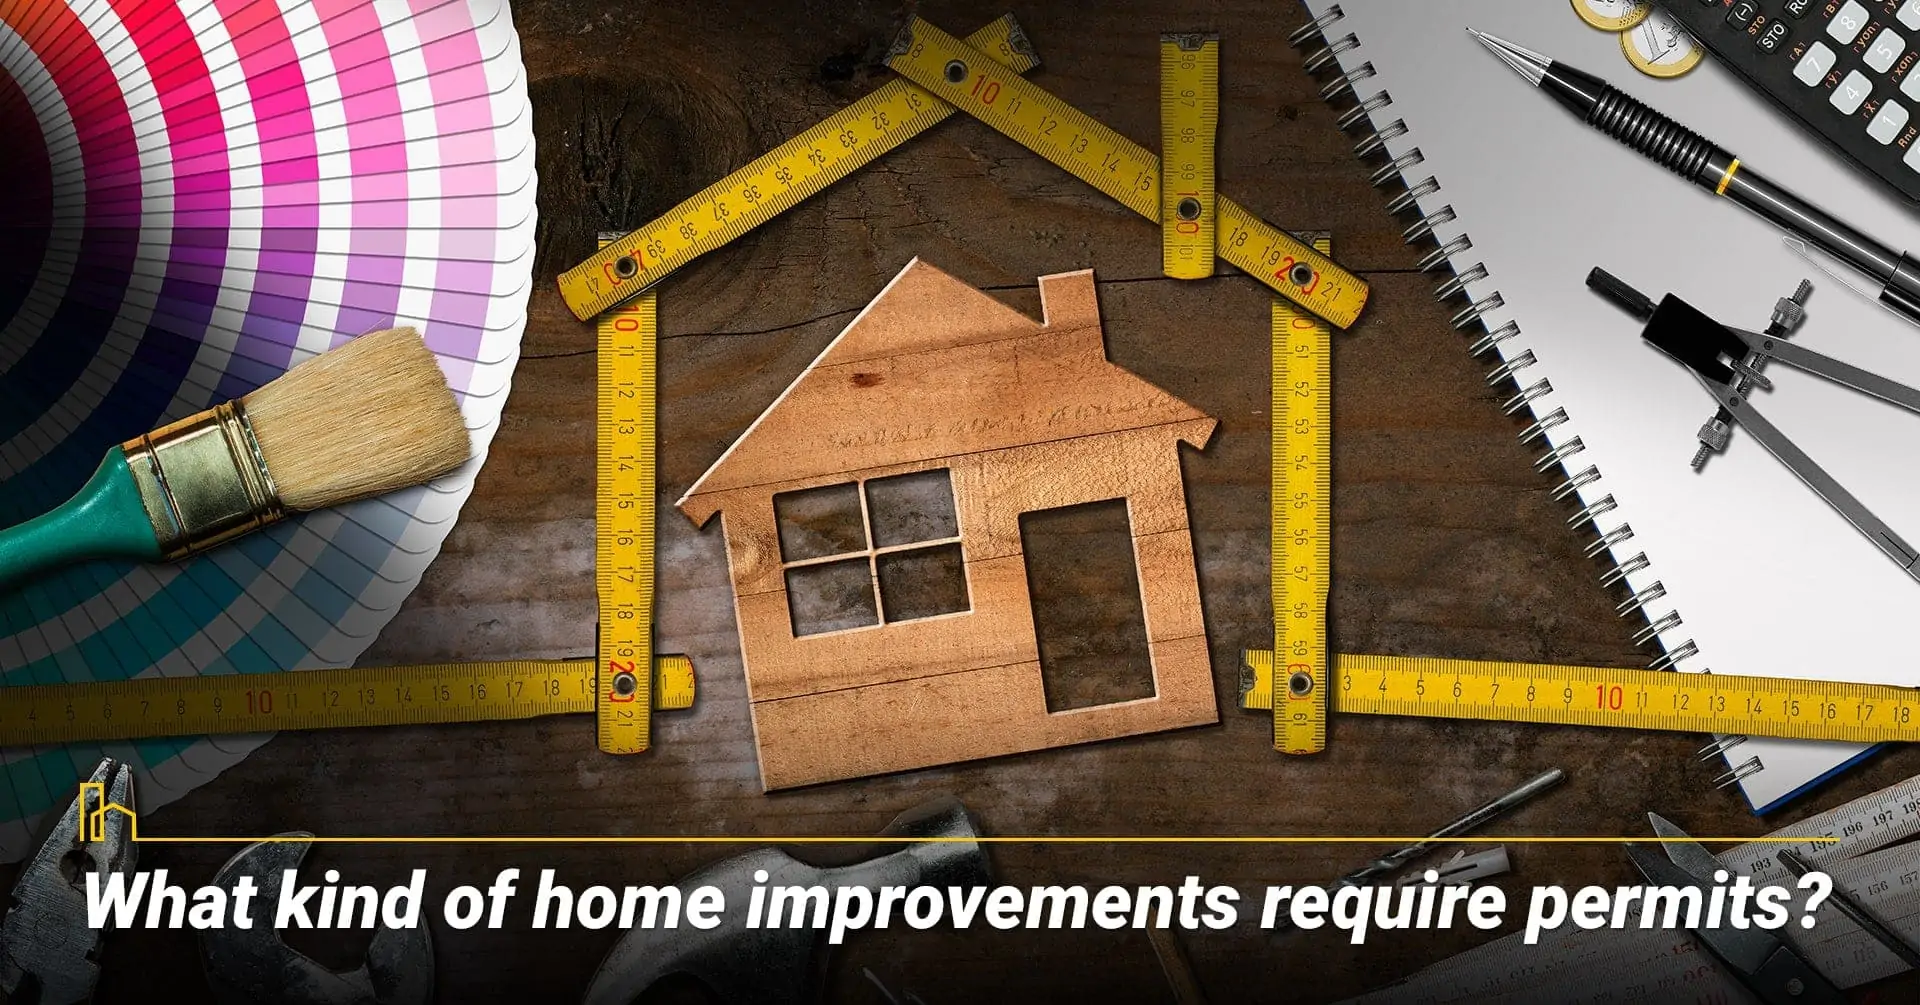 What kind of home improvements require permits? Decide on home improvement projects